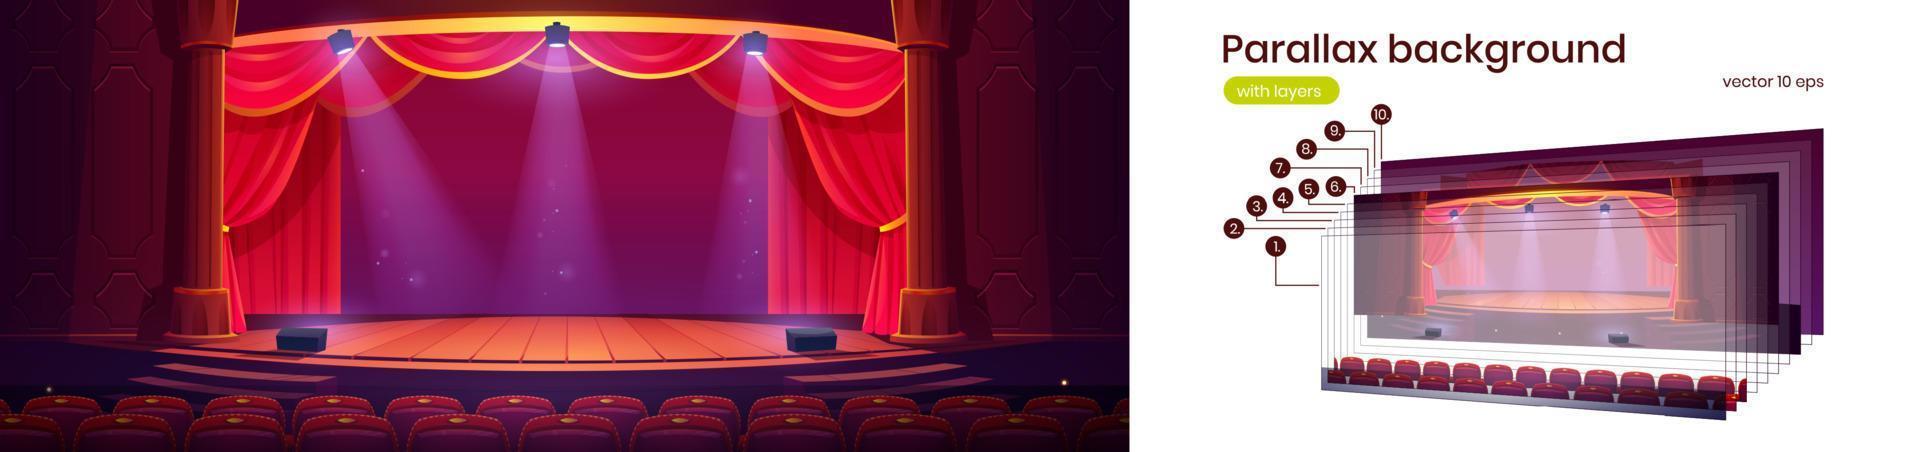 Parallax background with theater stage interior vector